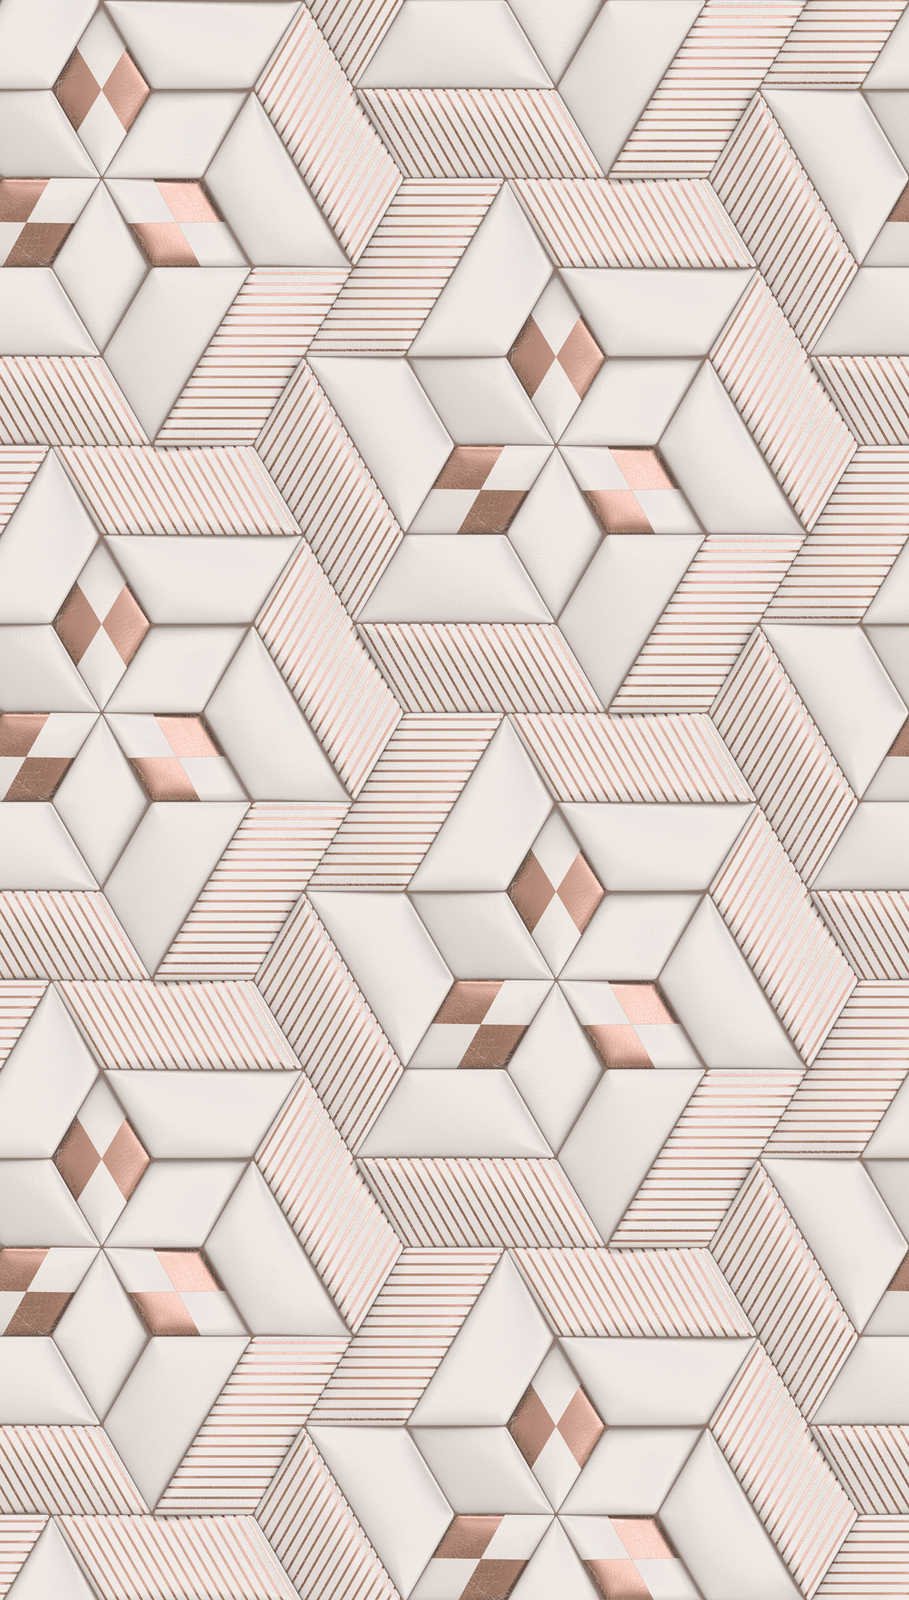             Non-woven wallpaper with abstract 3D pattern - white, cream, bronze
        